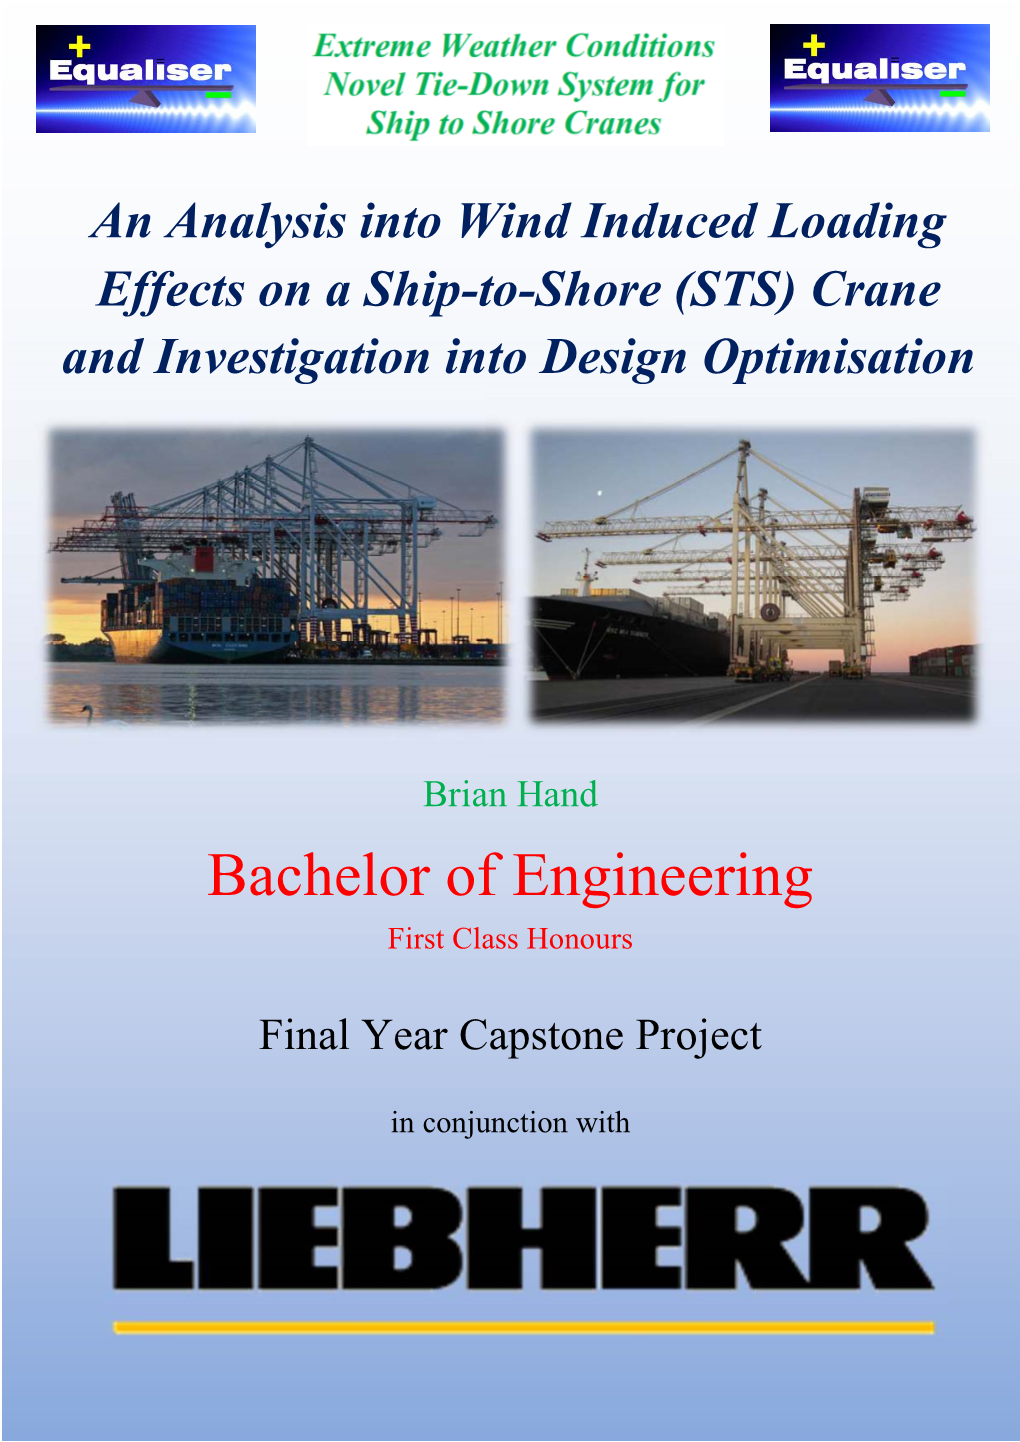 An Analysis Into Wind Induced Loading Effects on a Ship-To-Shore (STS) Crane and Investigation Into Design Optimisation